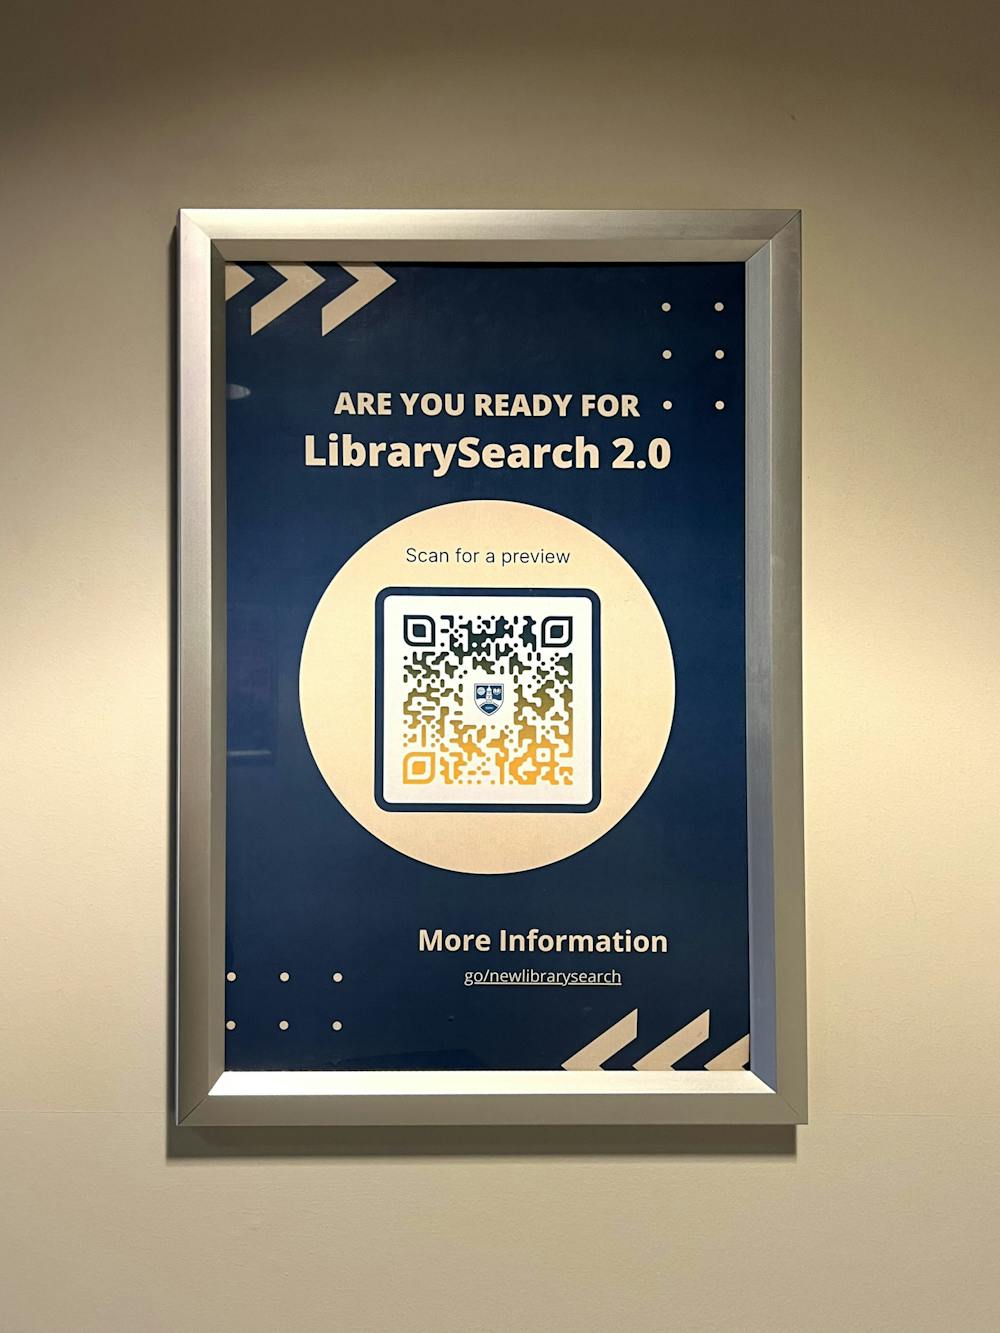 On Dec. 20 Middlebury libraries switched their database software, a transition they refer to as "LibrarySearch 2.0."